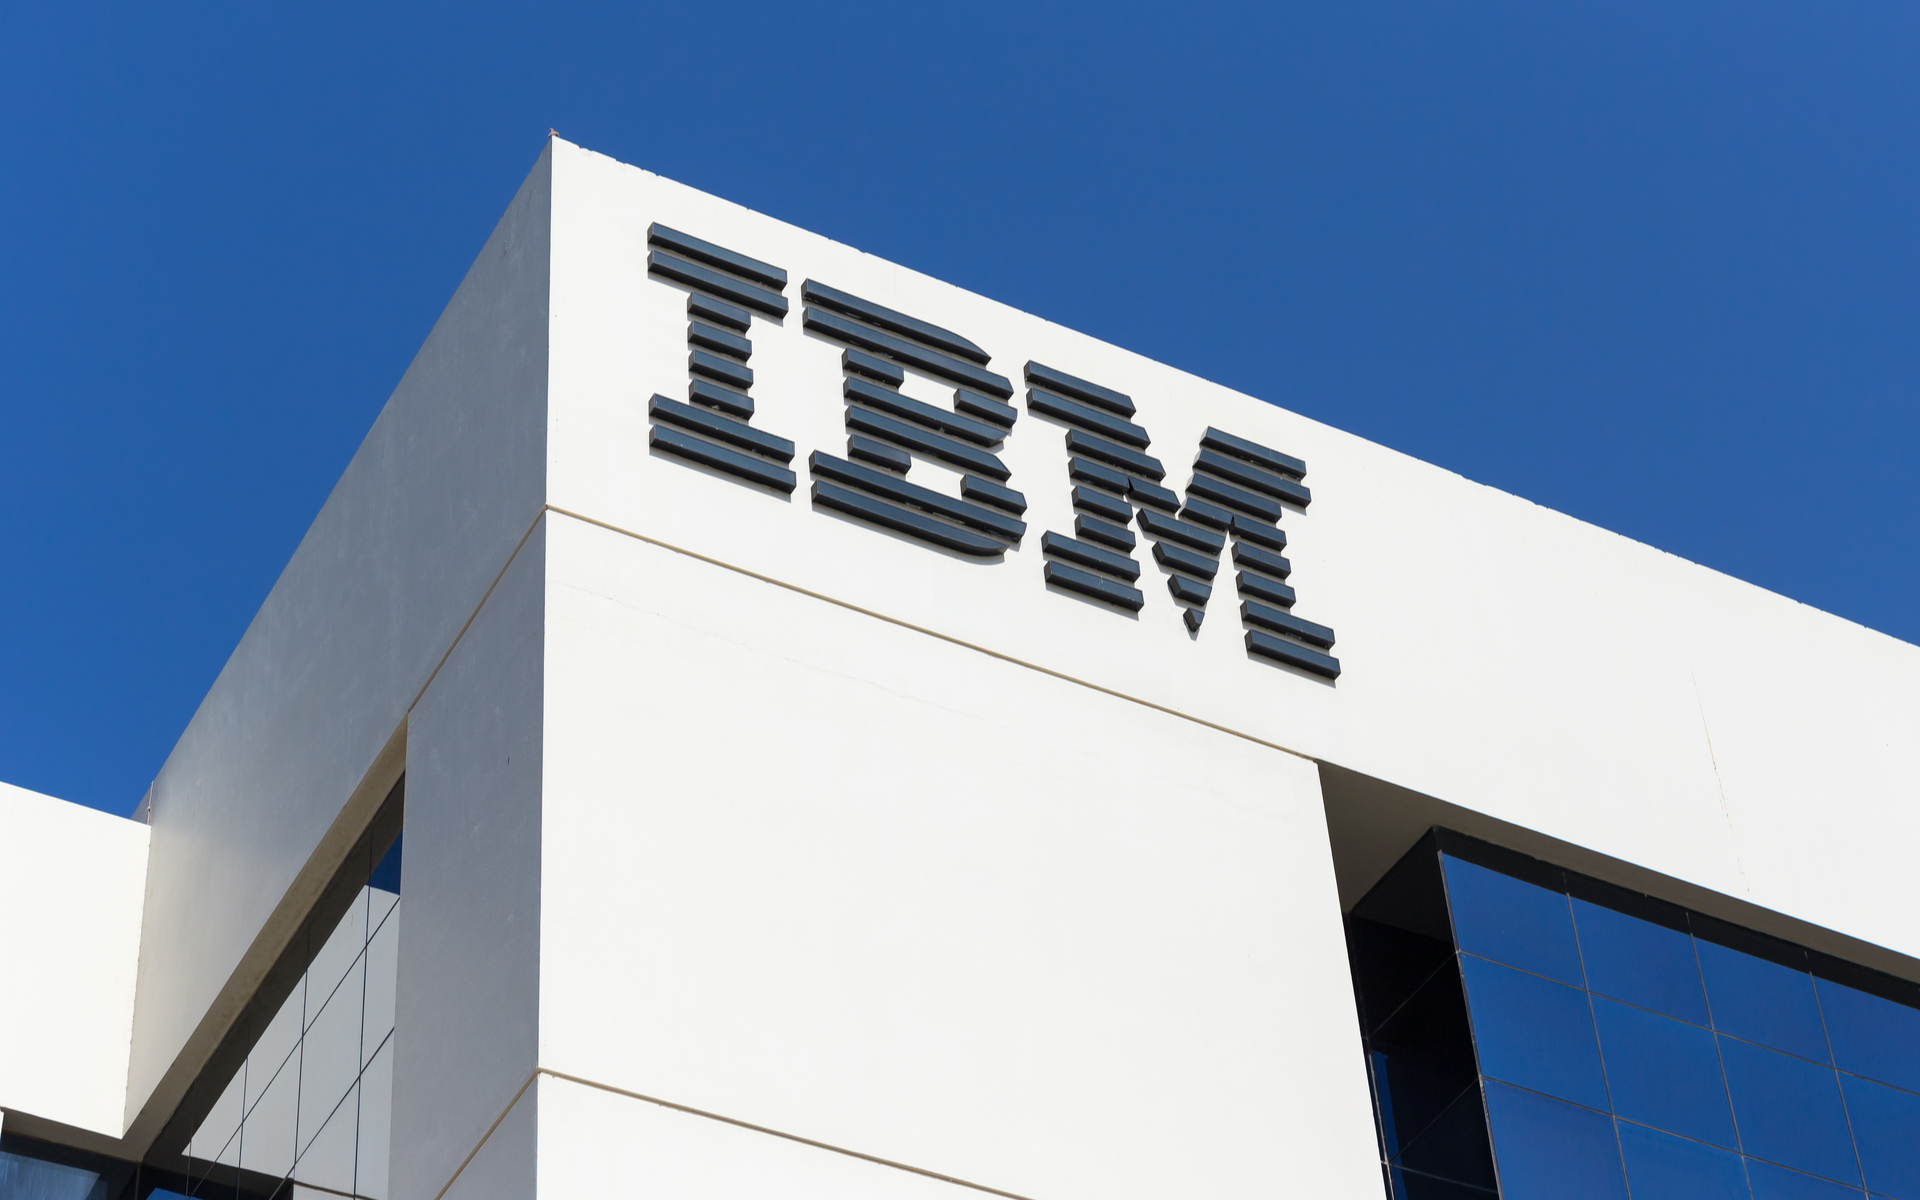 IBM Announces New CEO, is This Good For Blockchain?